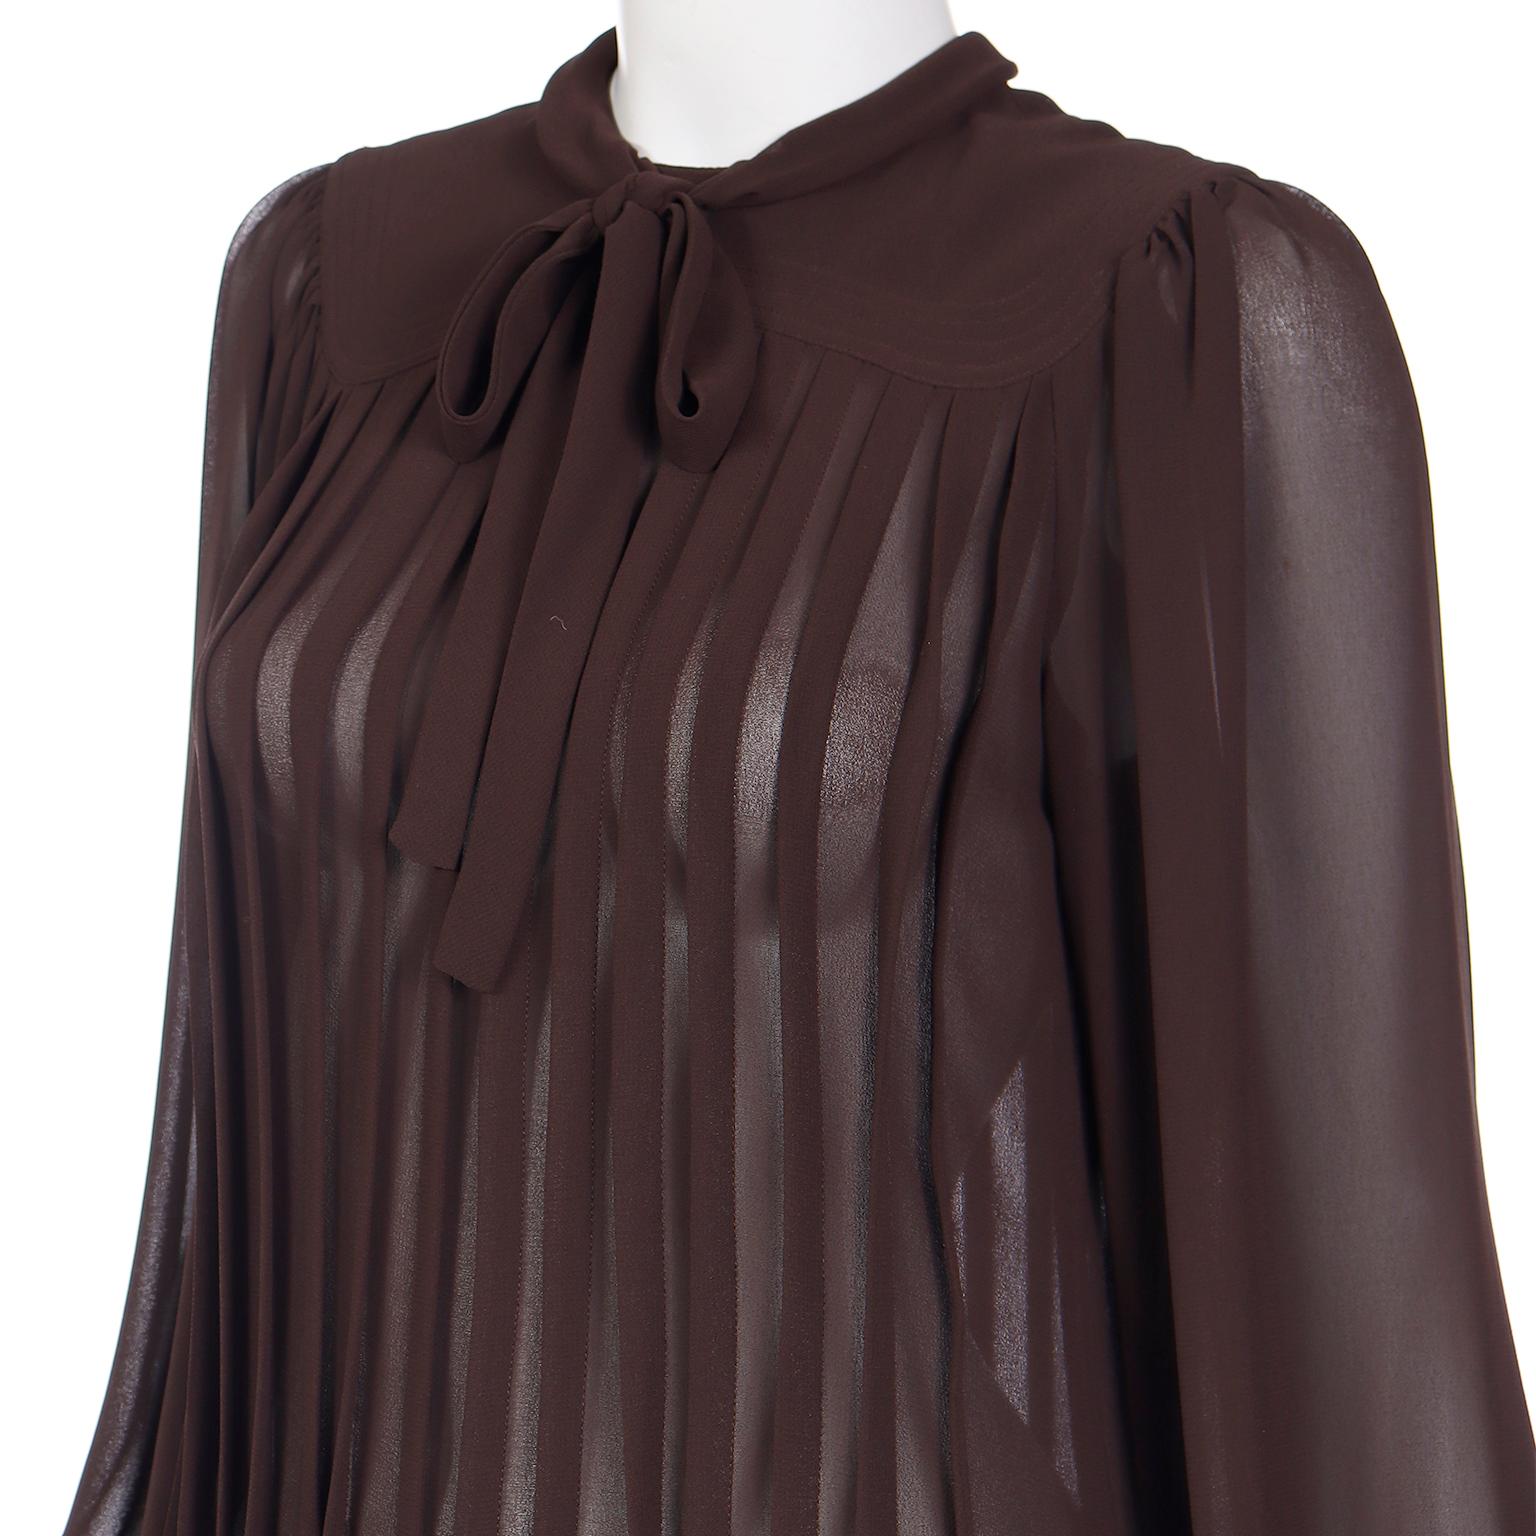 Vintage Albert Nipon 1970s Pleated Brown Semi Sheer Dress With Bow For Sale 2